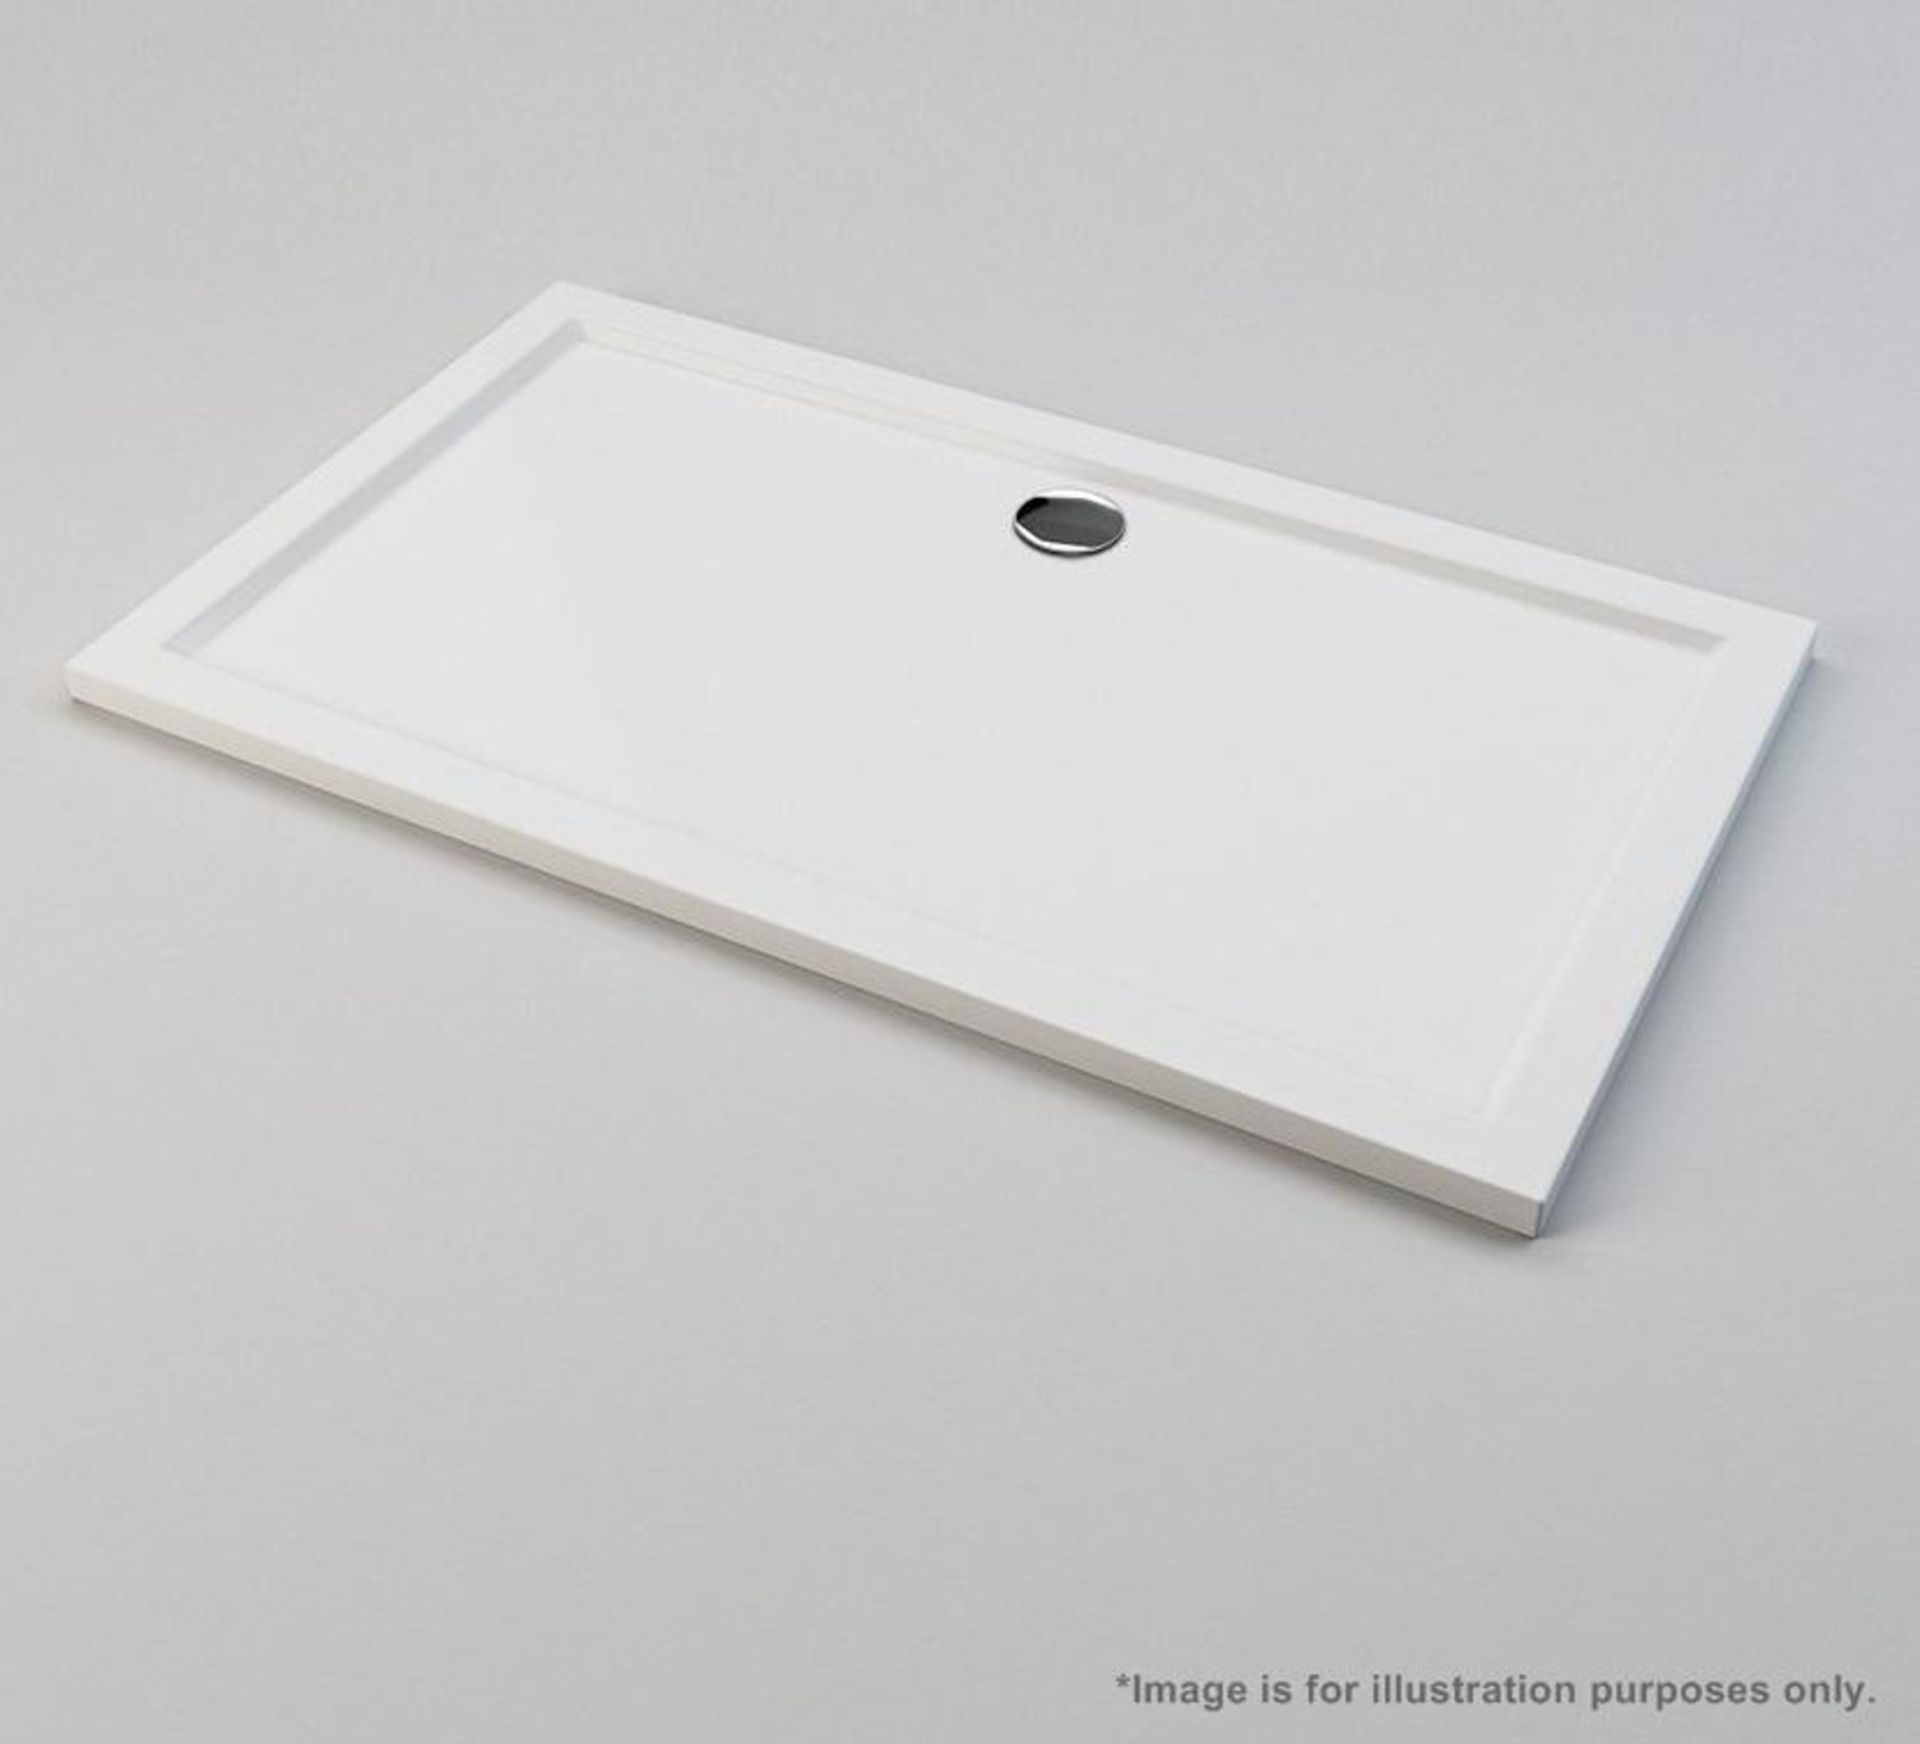 1 x Rectangular Pearlstone Shower Tray (SRT1480) - Made In UK - Dimensions: 1400 x 800 x 40mm - New - Image 2 of 3